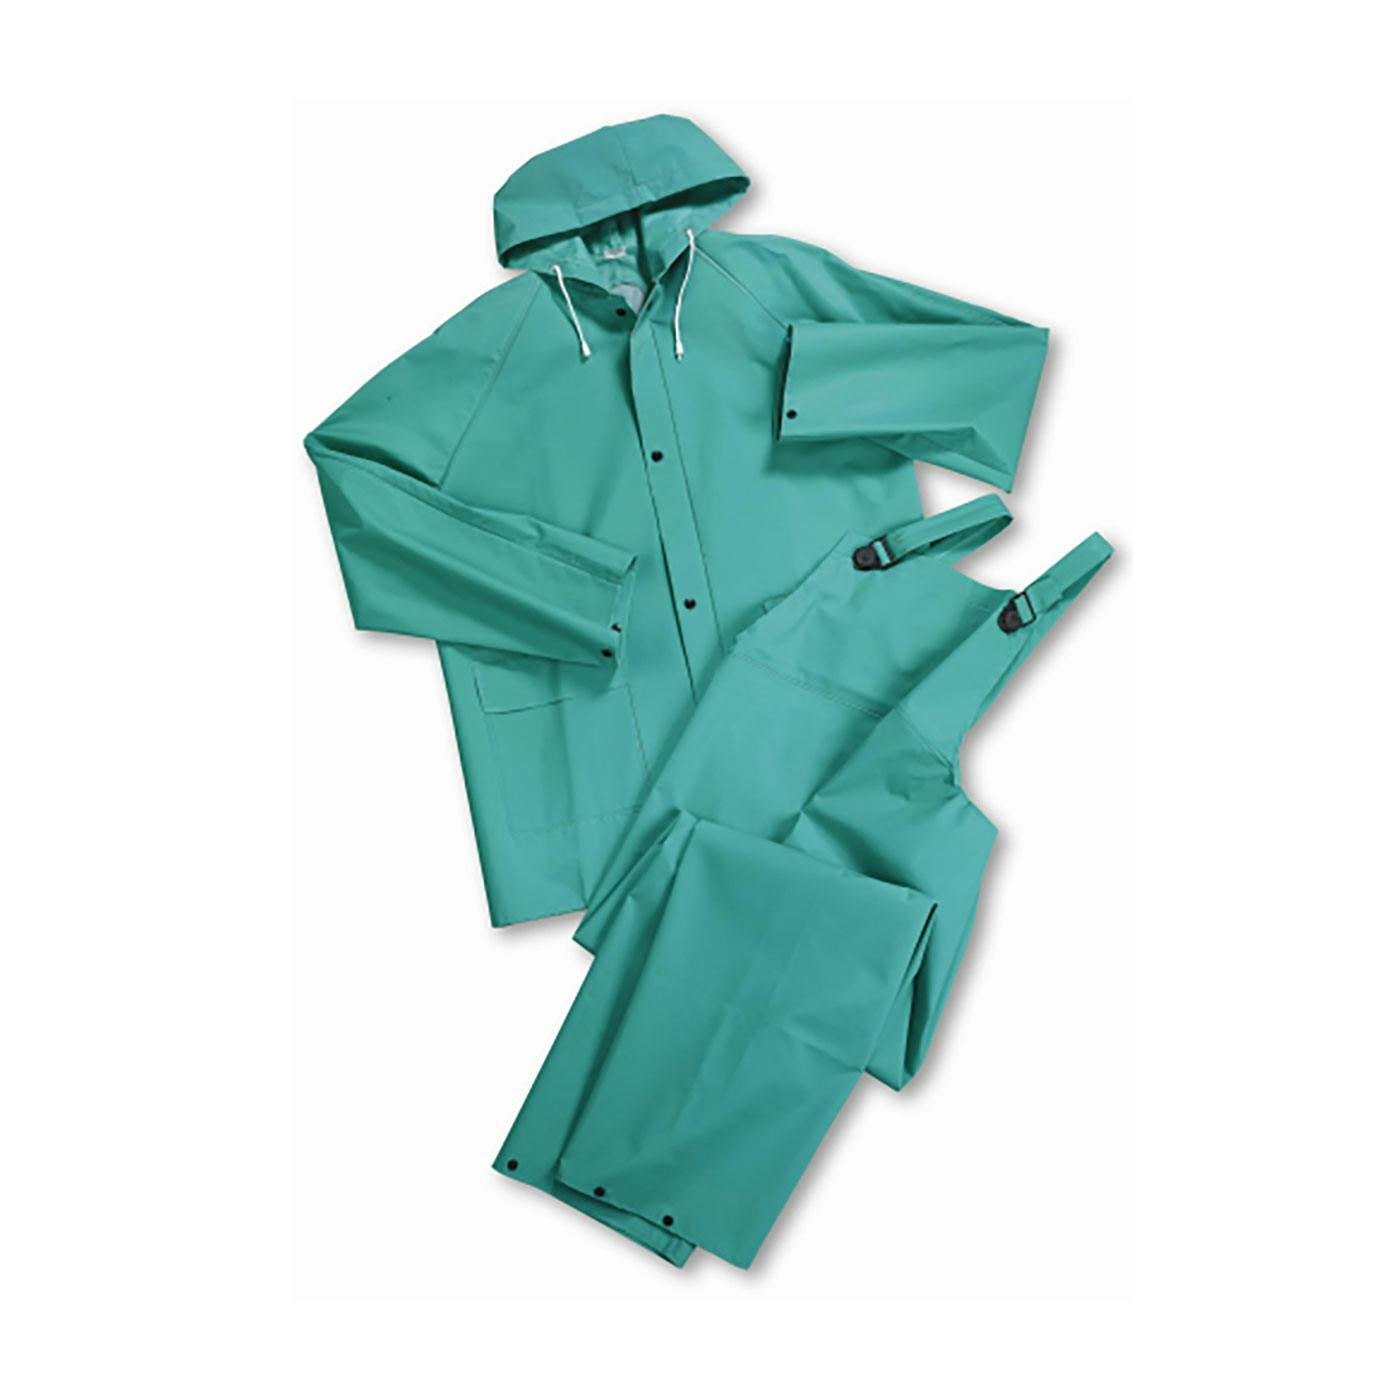 Treated PVC Two-Piece Acid Suit - 0.40 mm, Green (4045)